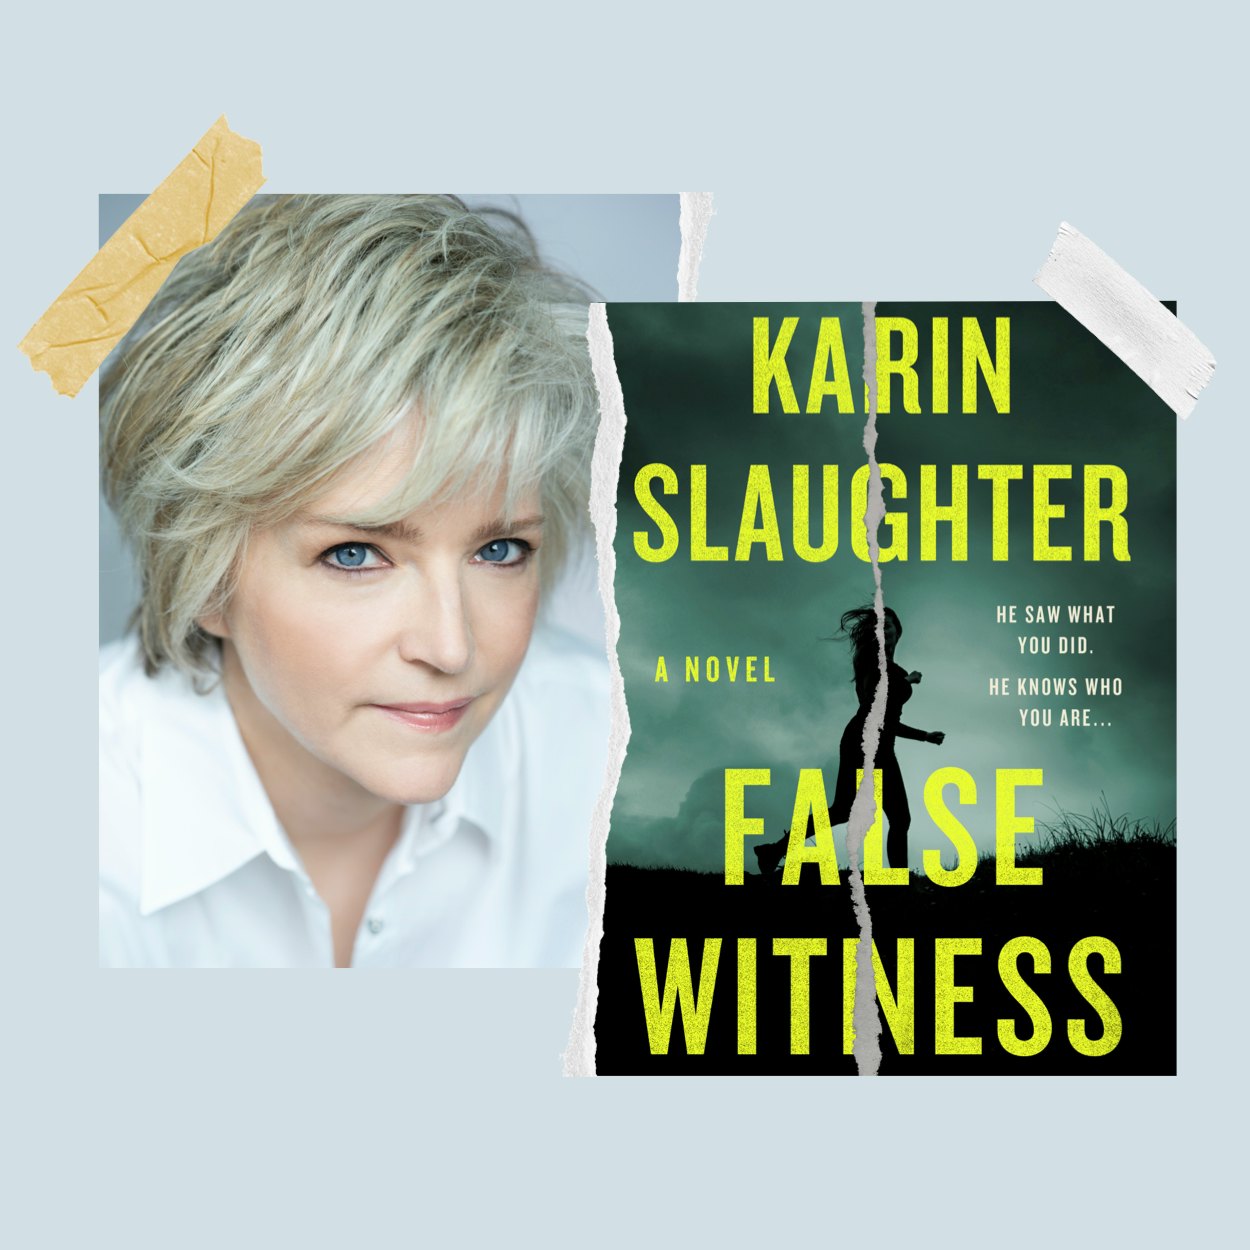 Karin Slaughter's 'False Witness': Read The First Chapters Now